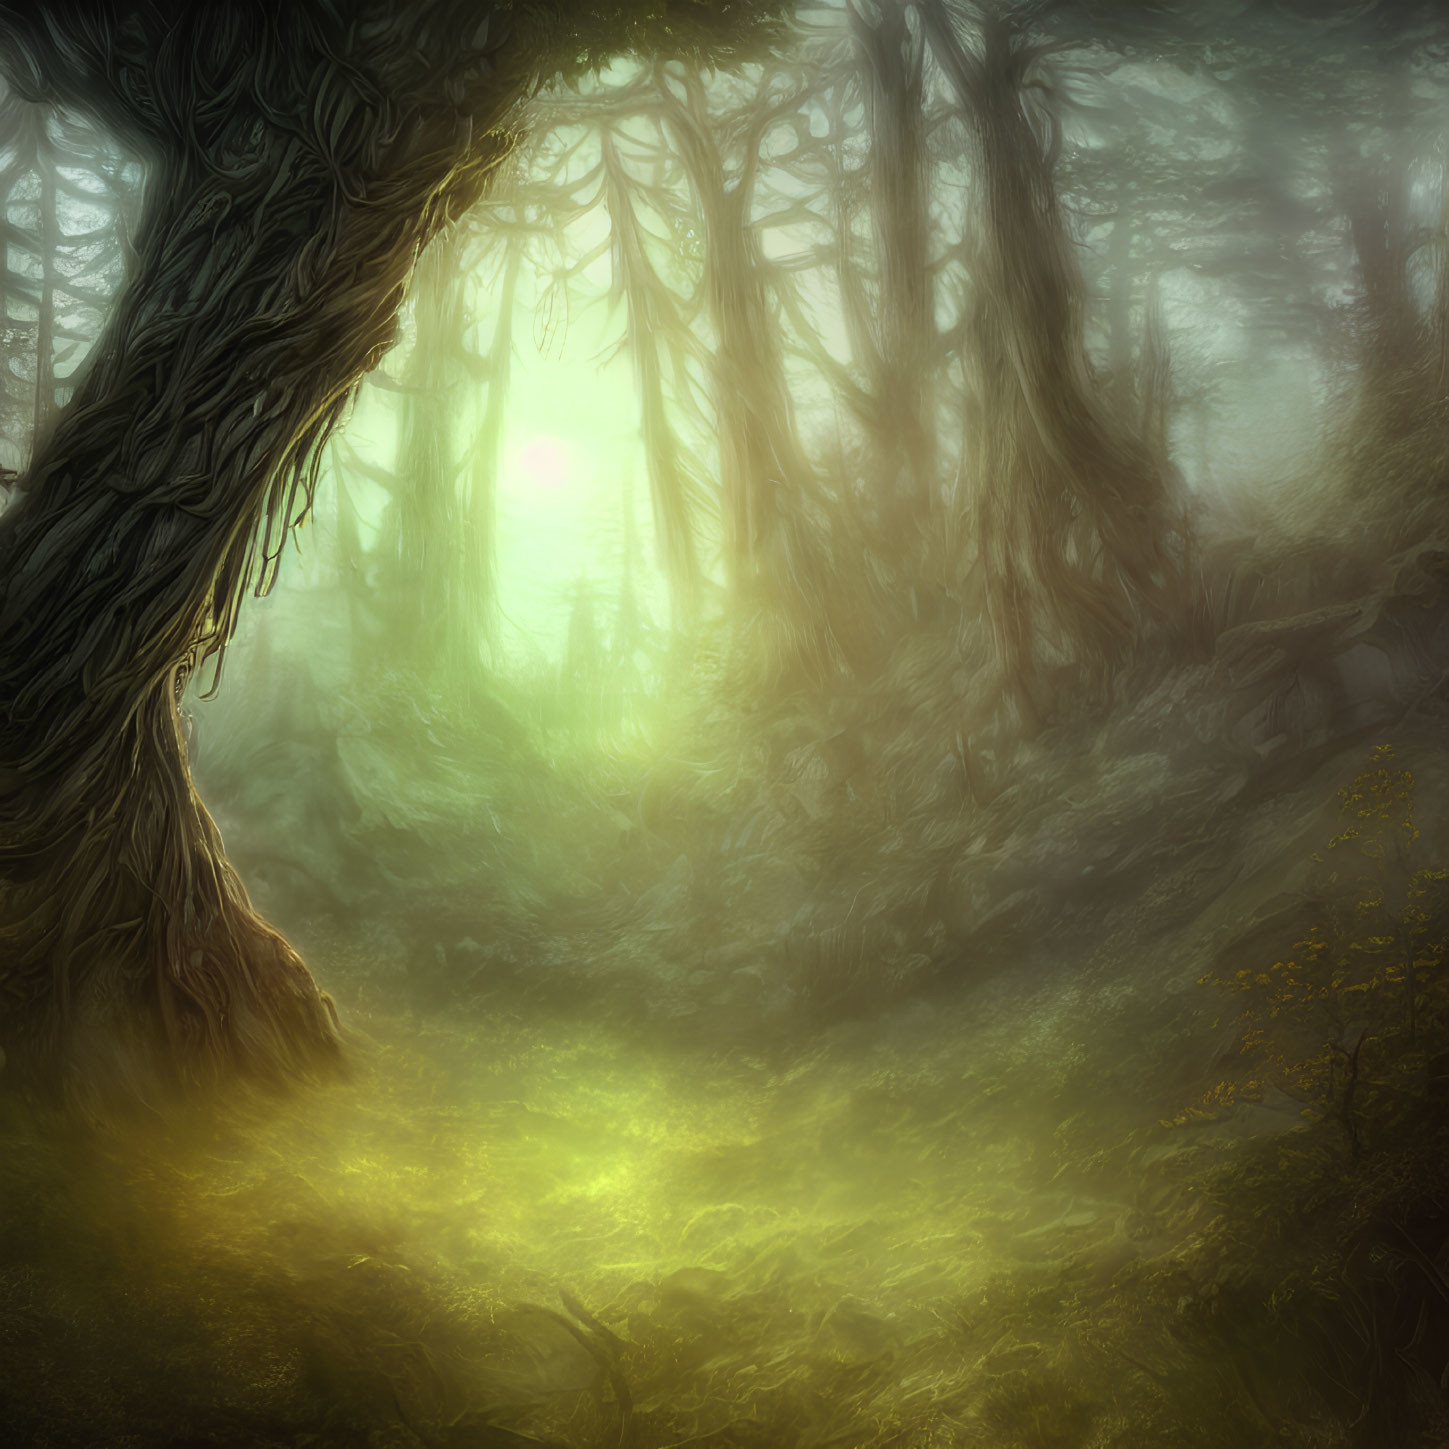 Mystical forest with twisted trees and green glow